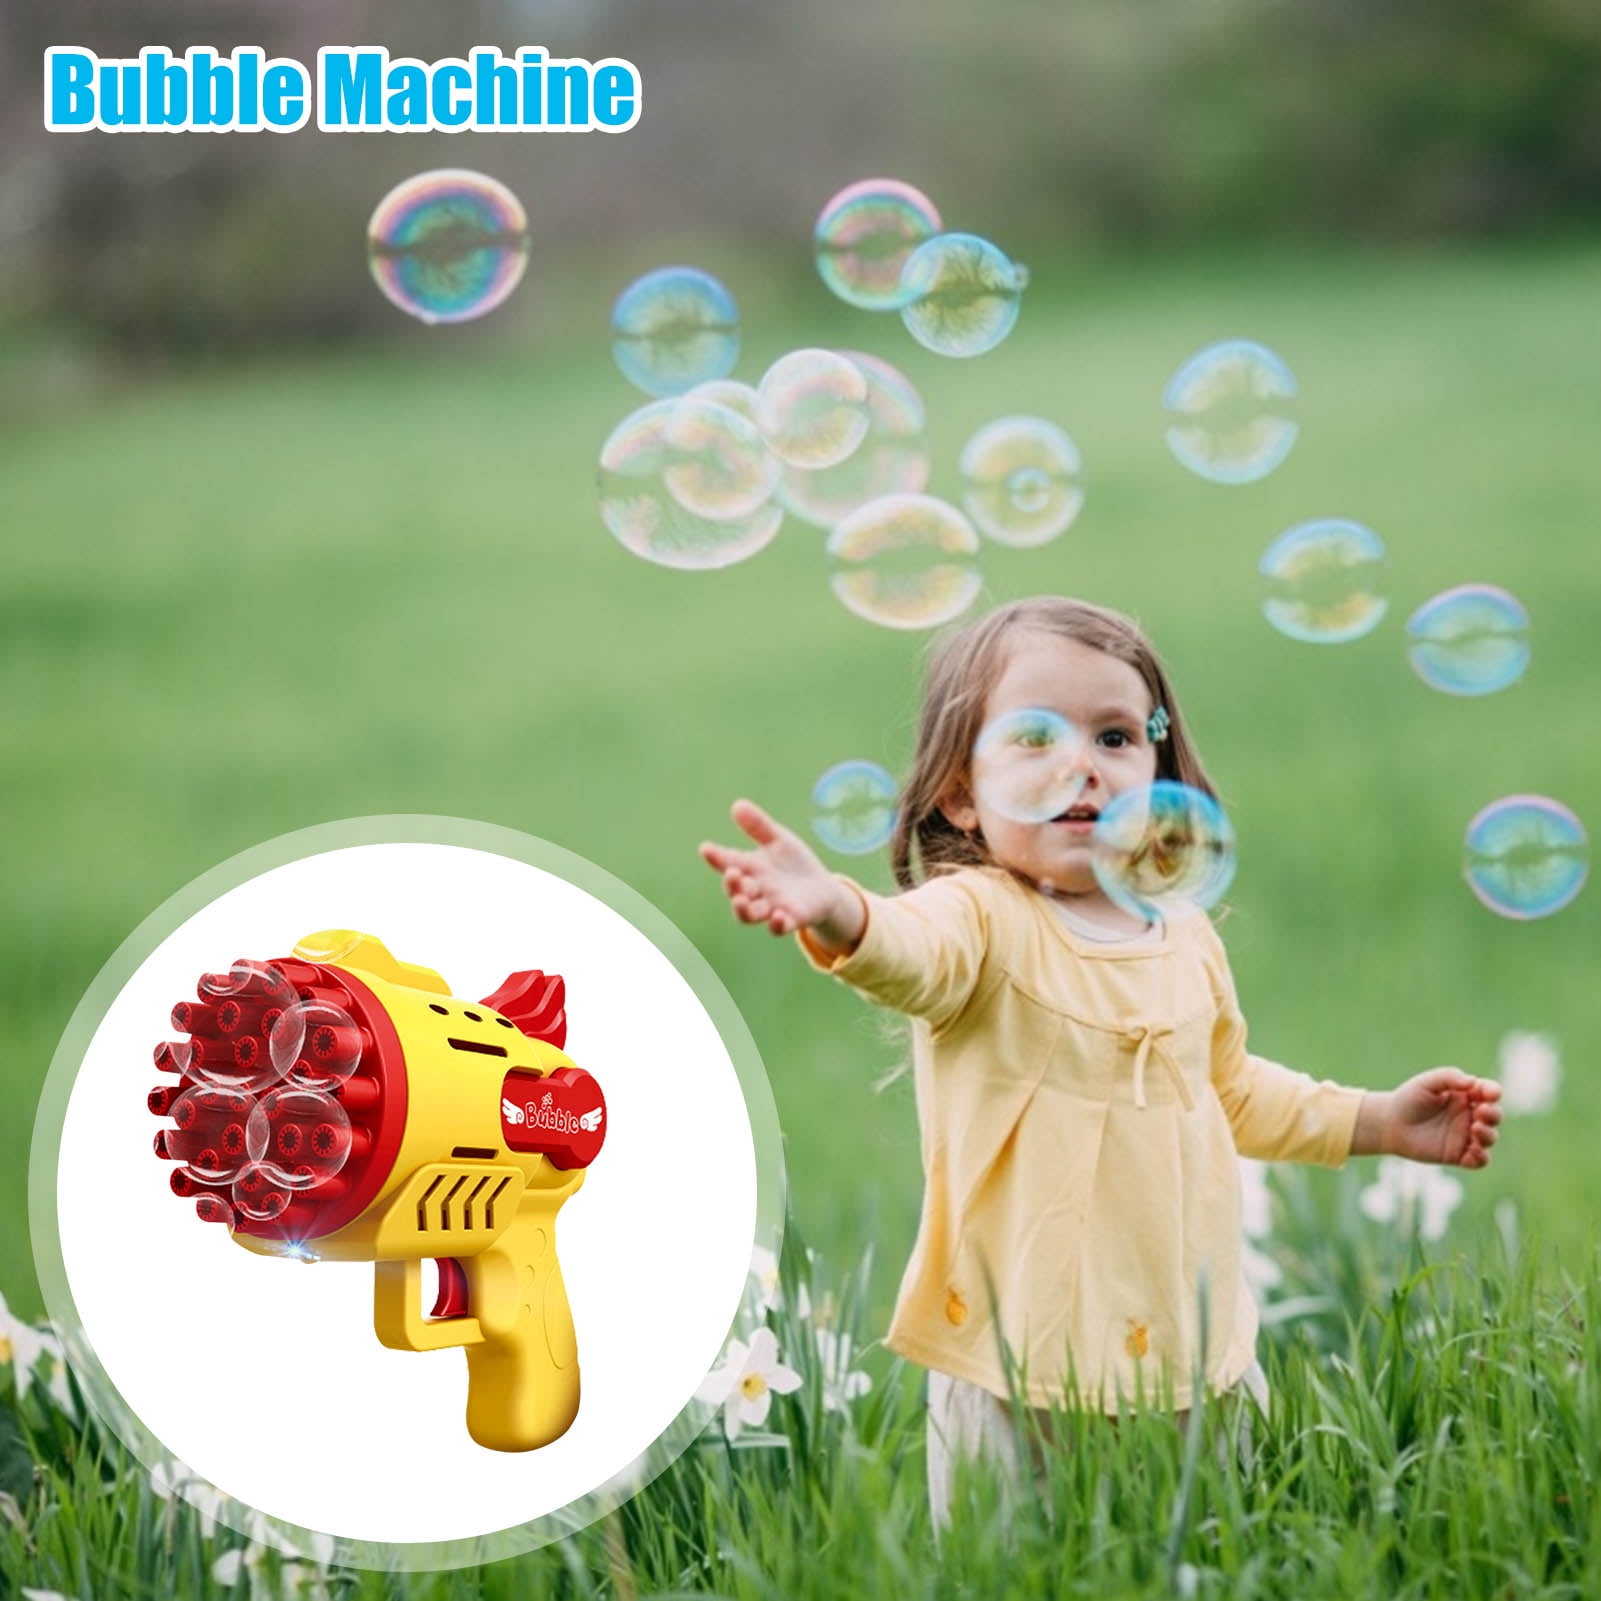 32-hole Bubble Gun Electric Automatic Soap Rocket Bubble Machine Portable  Outdoor Party Wedding Party Led Light Blower Birthday Gifts - Temu